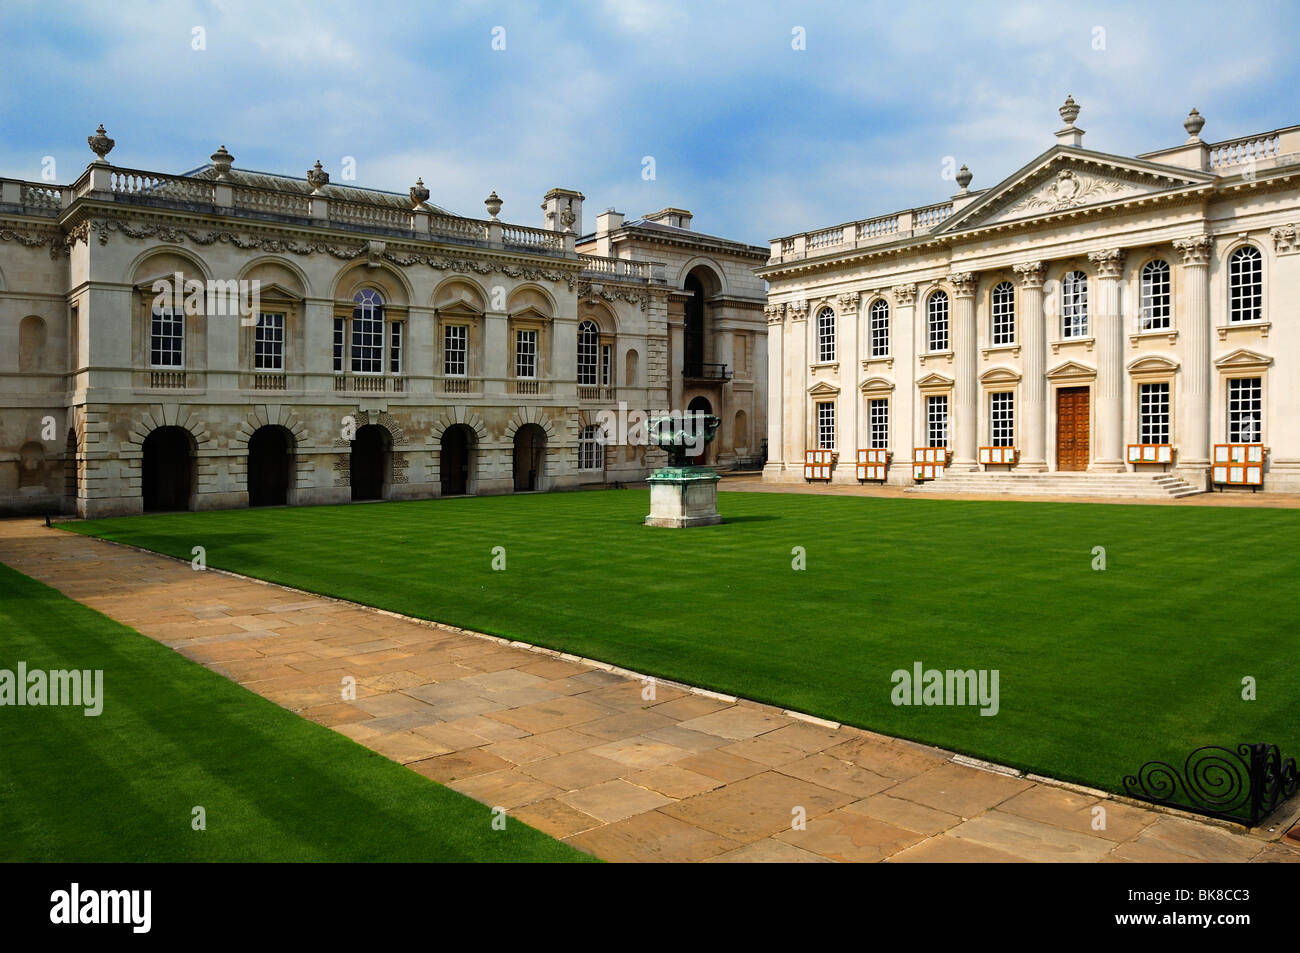 Senate House with courtyard, designed in 1730 by James Gibbs, purely classical architecture, King's Parade, Cambridge, Cambridg Stock Photo